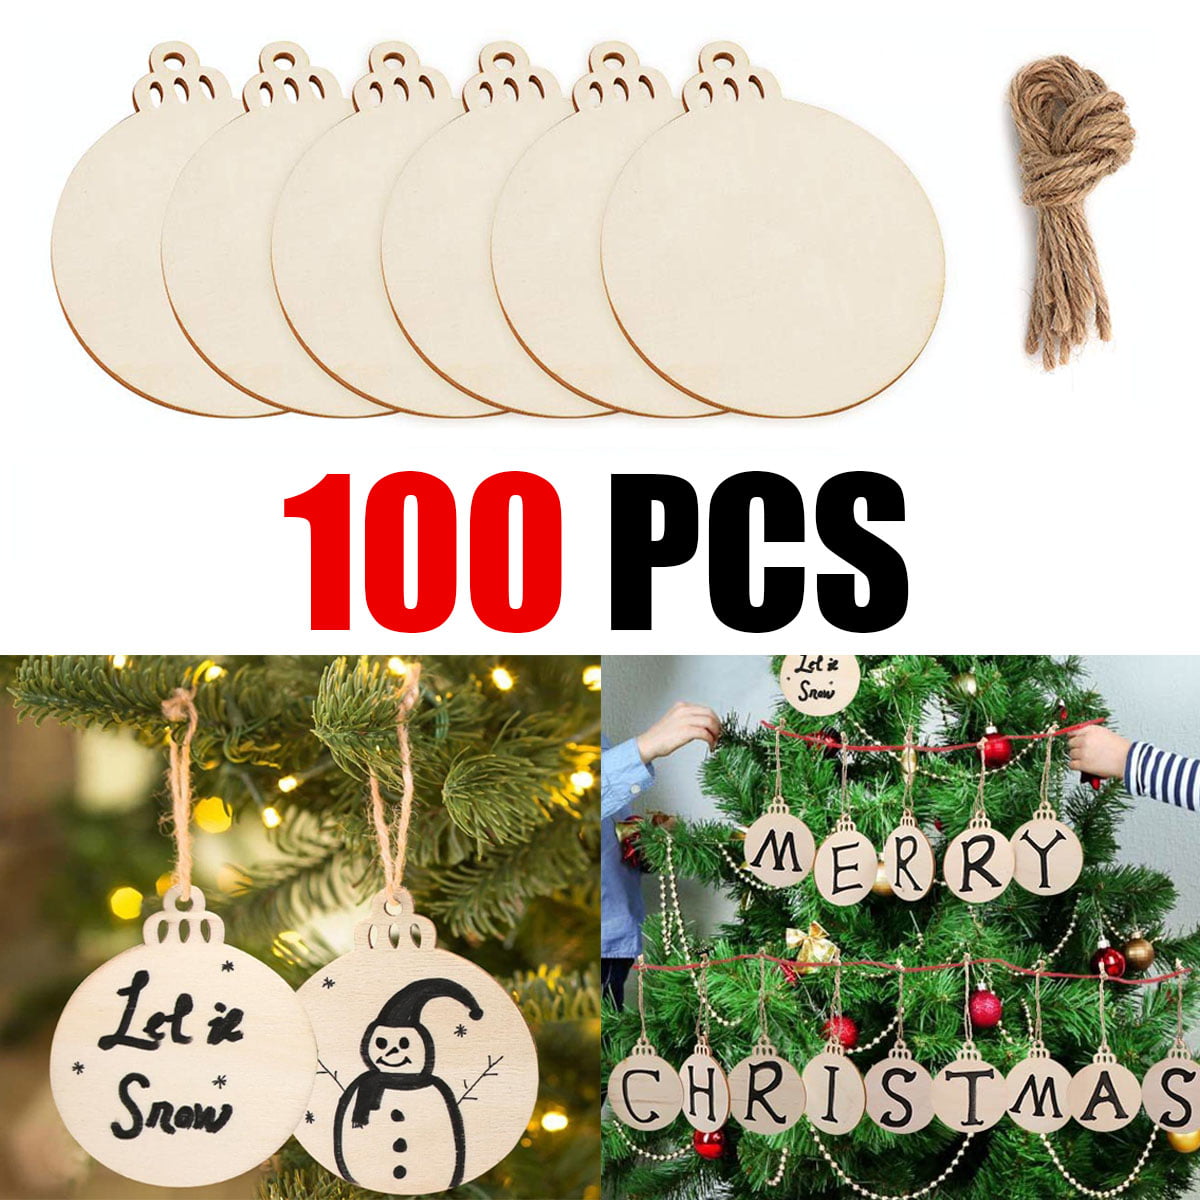 HESTYA 150 Pieces Wooden Ornaments Mini Christmas Theme Natural Wood Slices Decorative Wooden Cutout Slices for Christmas Tree Ornaments Hanging DIY Craft Xmas Decorations 